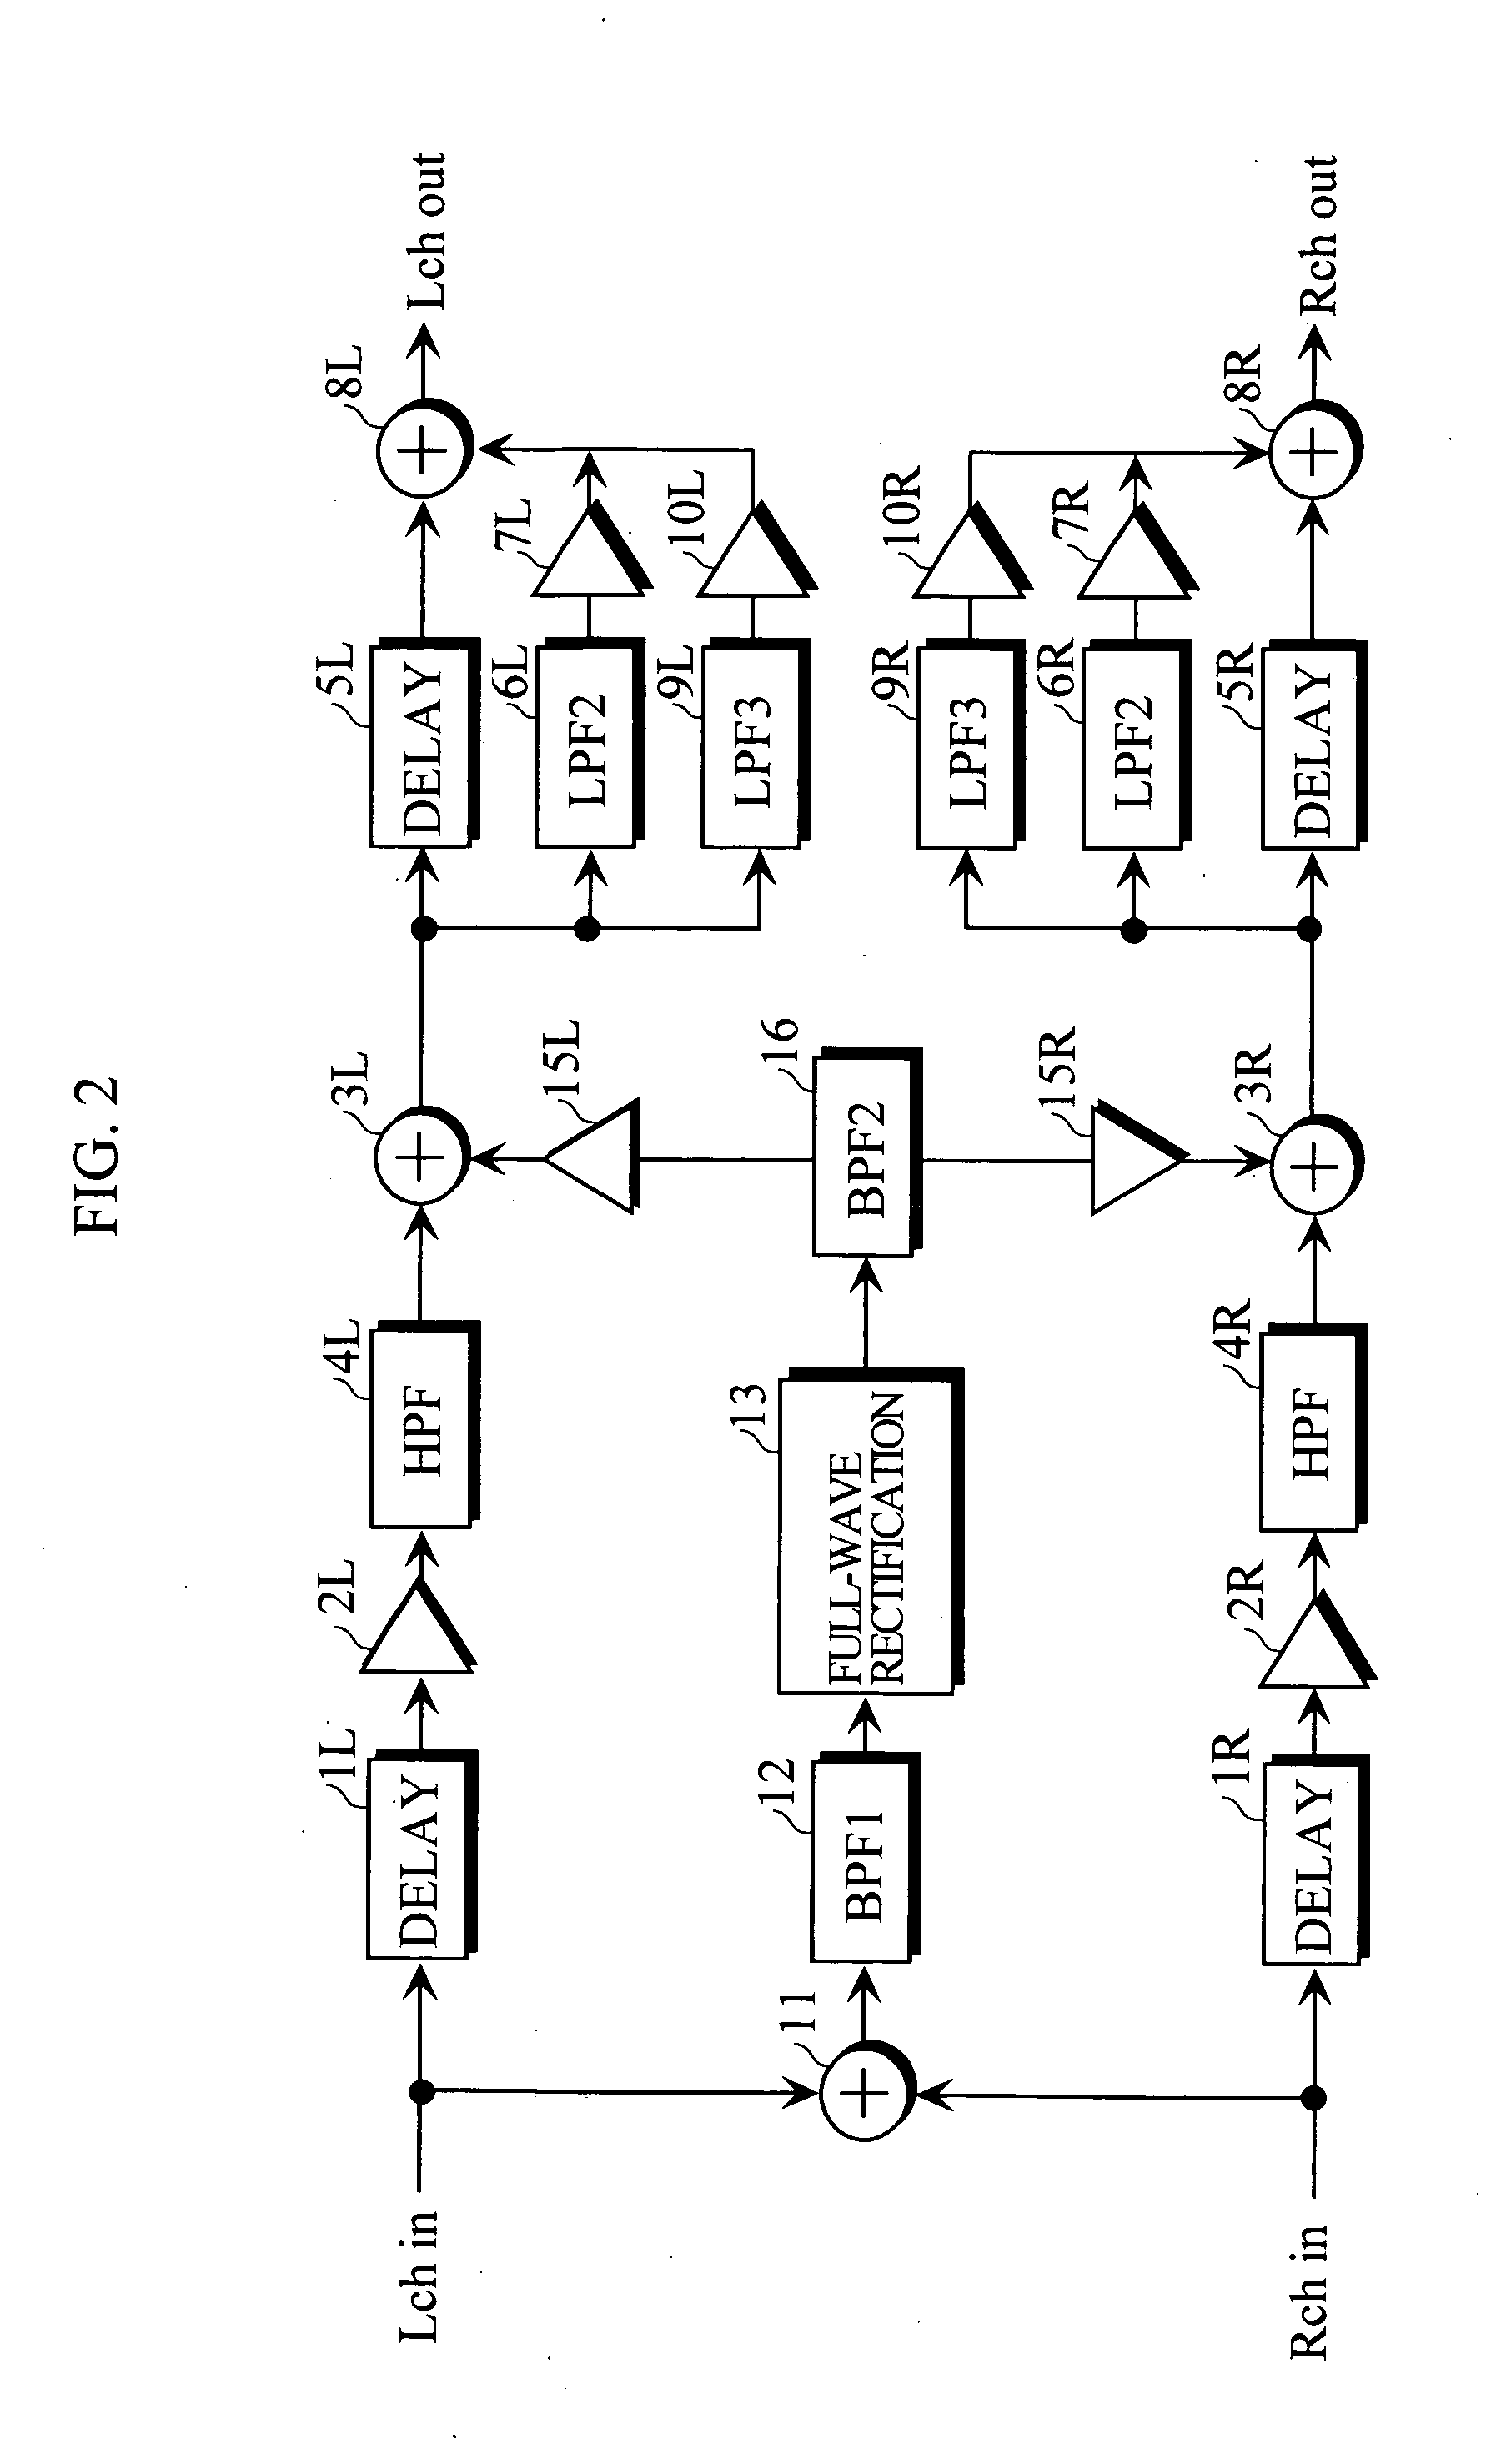 Bass boost circuit and bass boost processing program